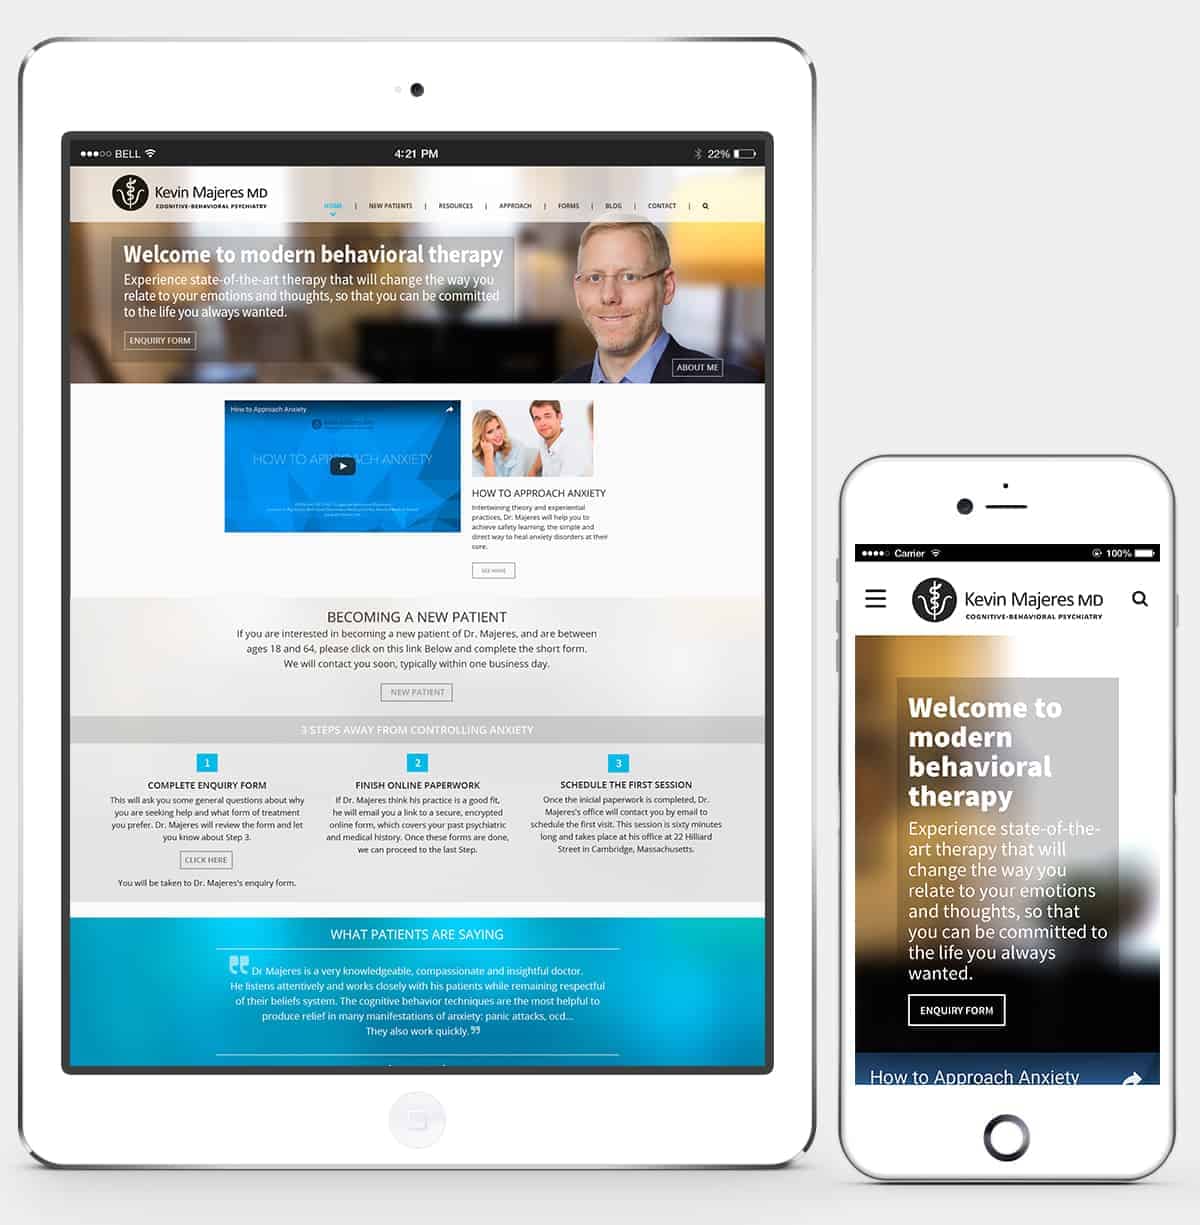 Kevin Majeres MD Home Page Desktop and Mobile